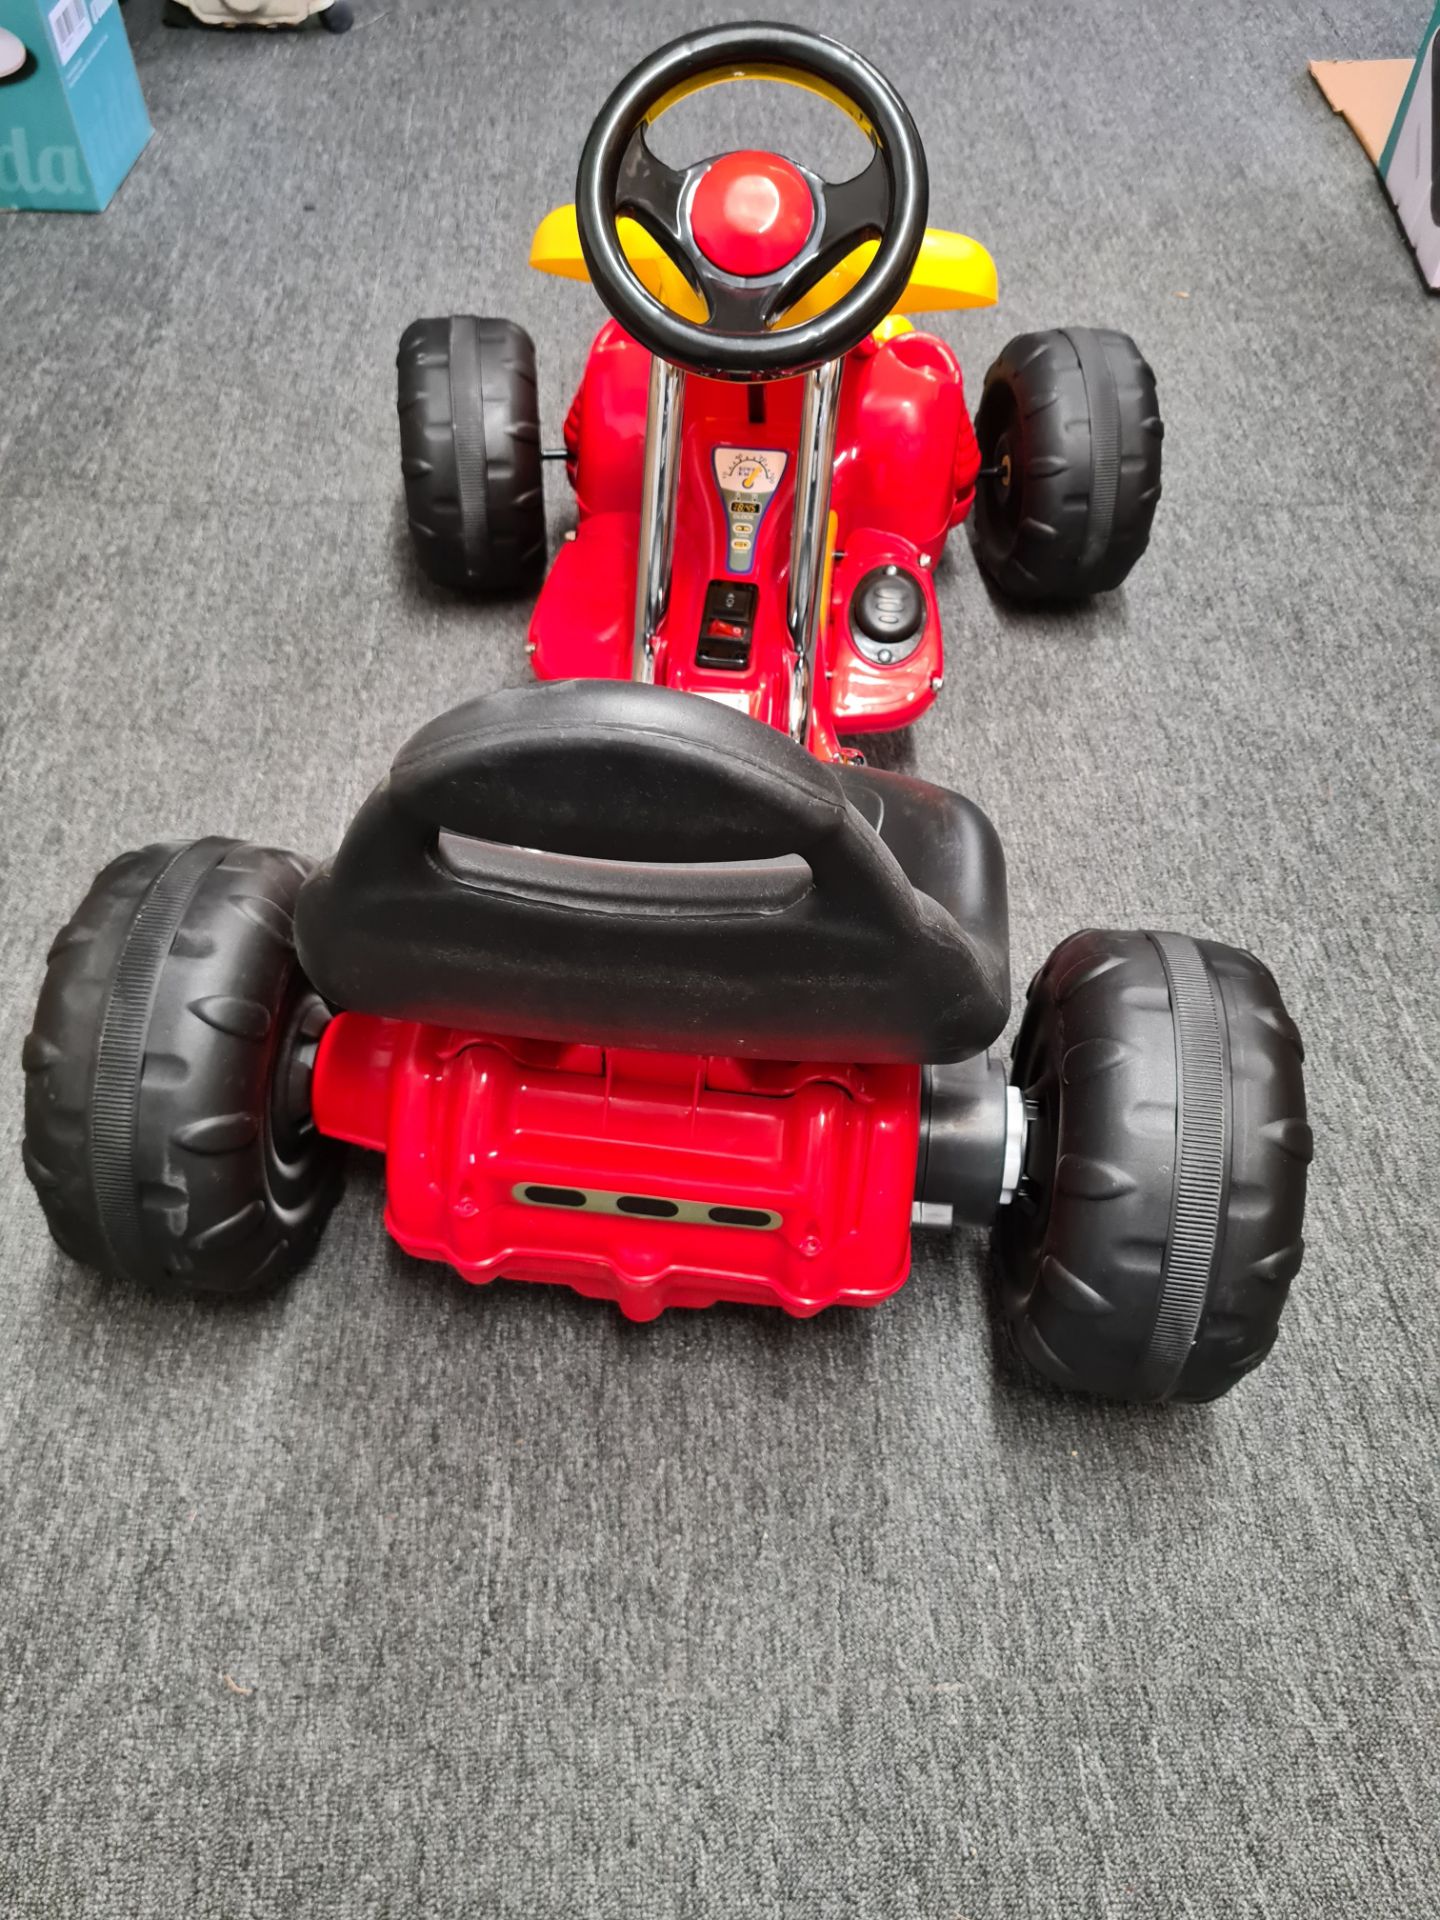 15 X ELECTRIC 6V RIDE ON GO KART - RED / YELLOW £2250- BRAND NEW FOR KIDS - Image 4 of 10